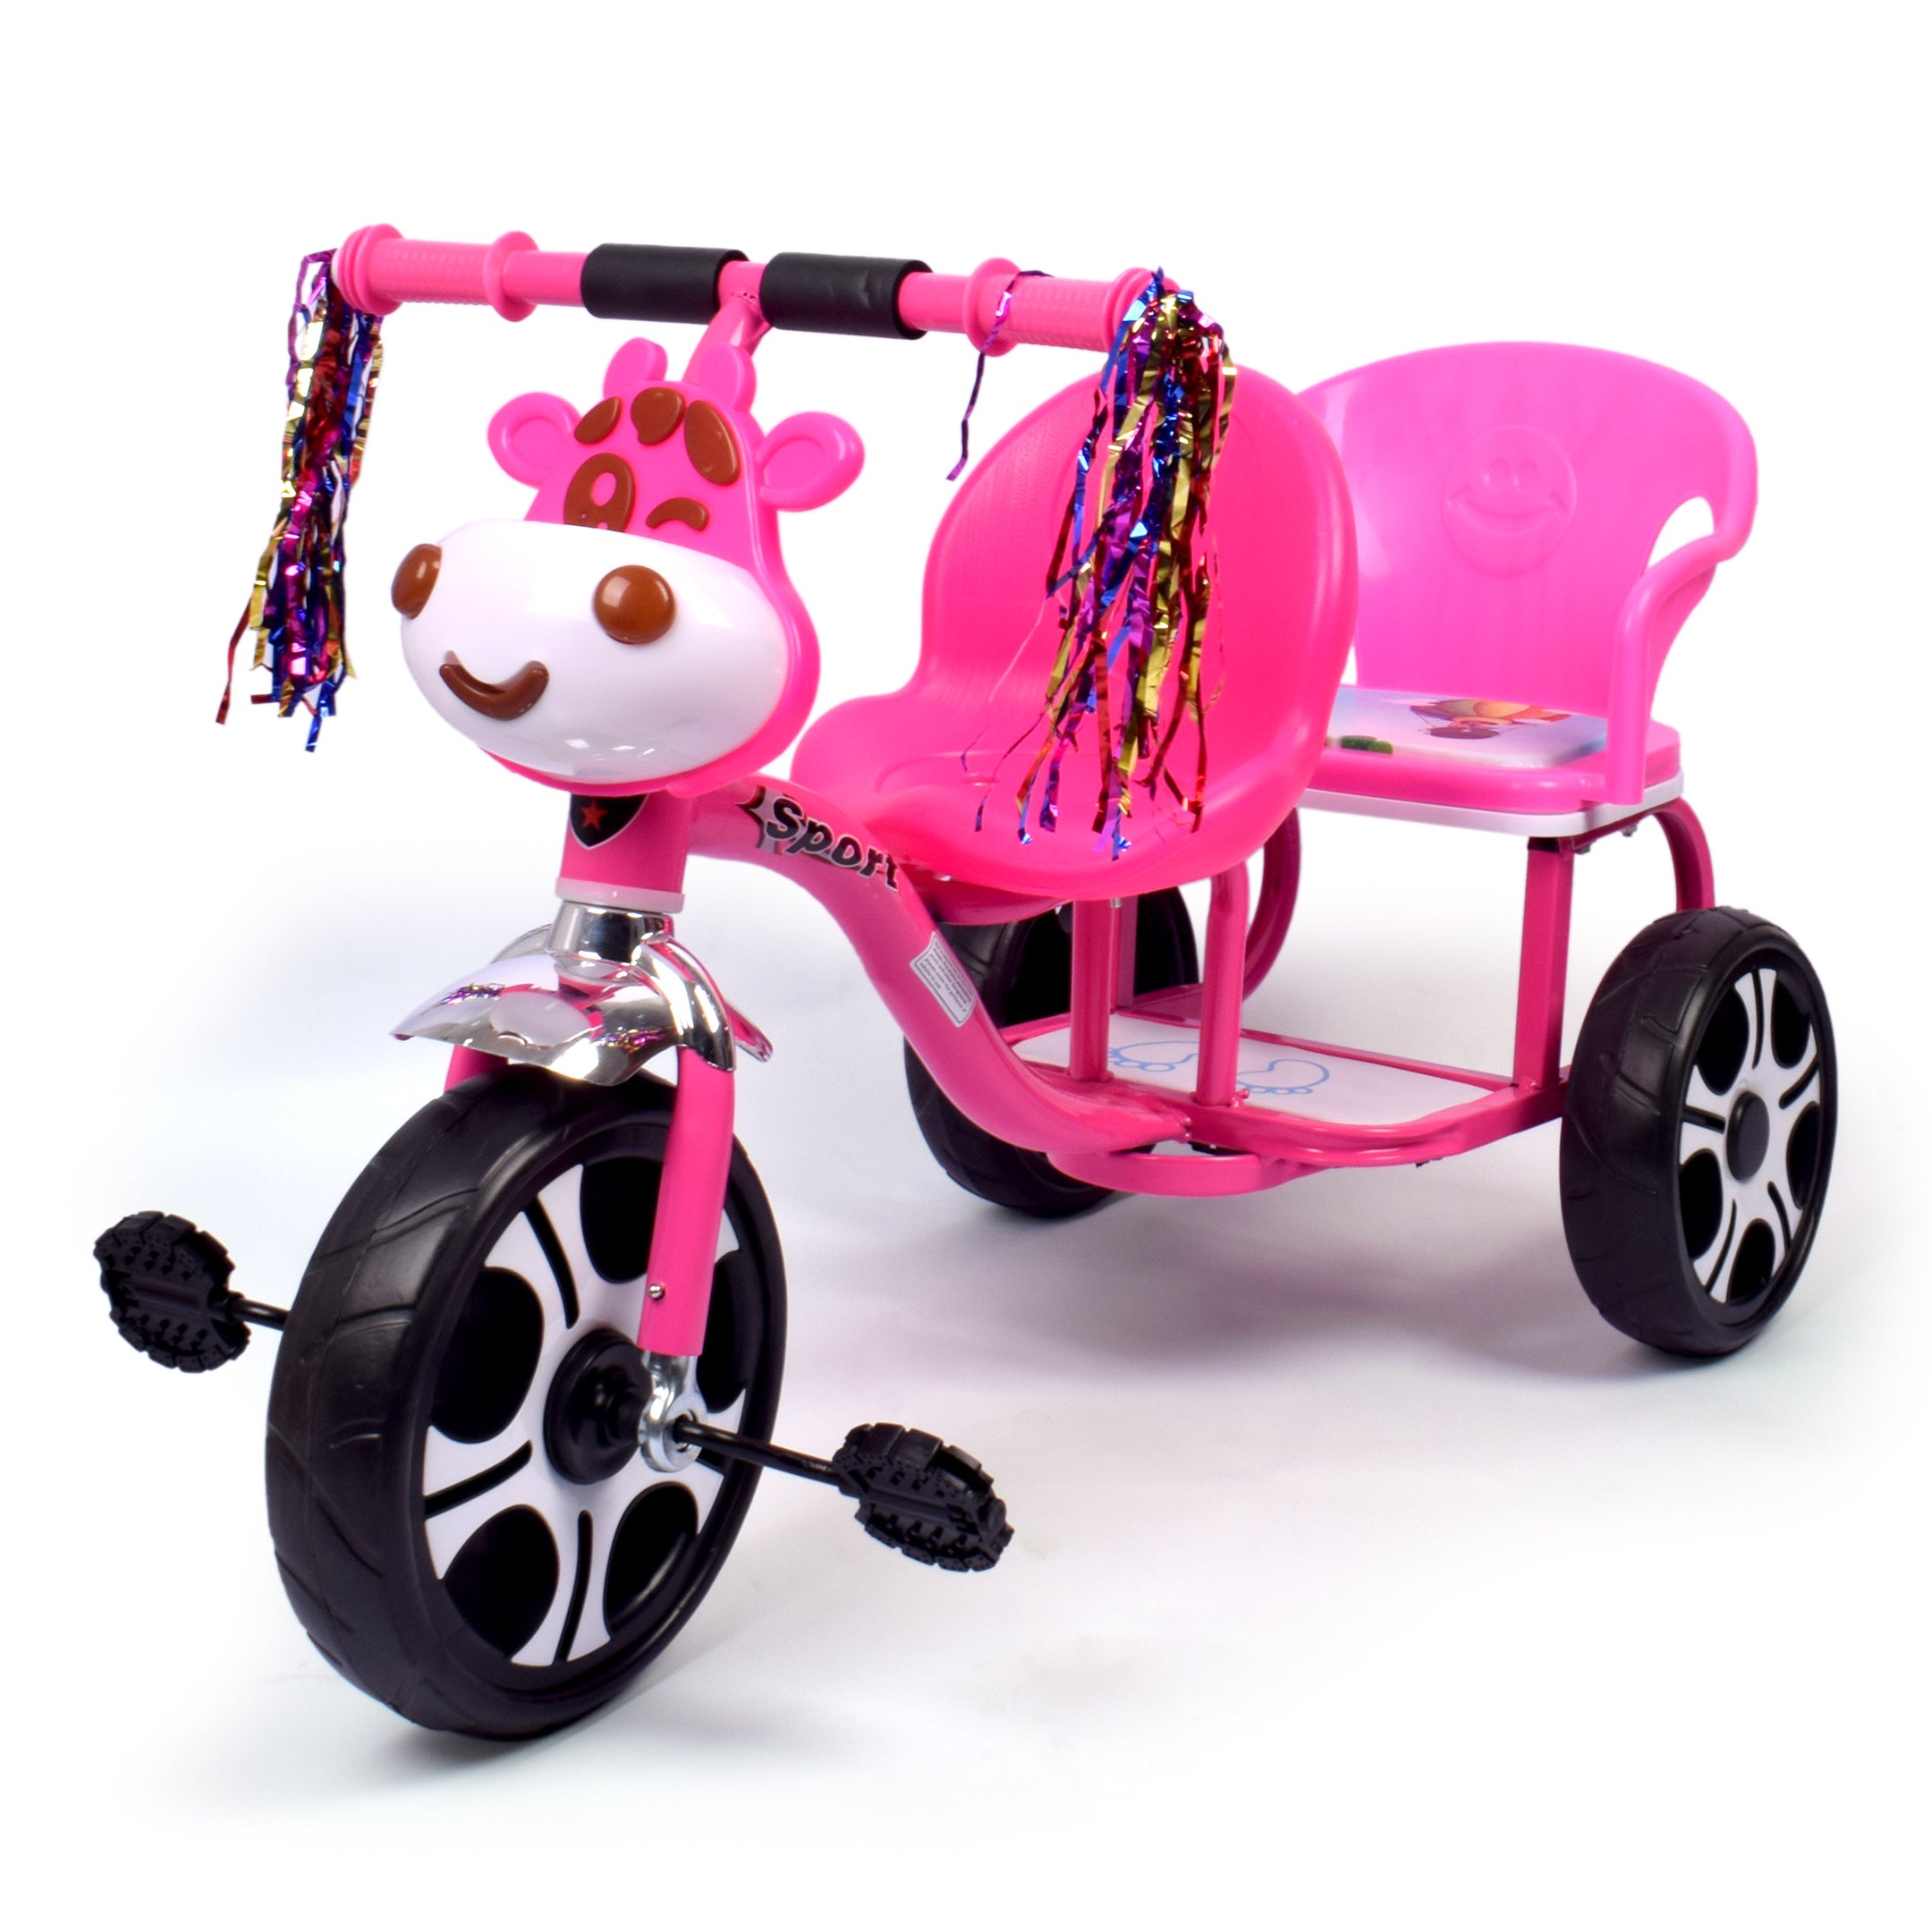 Kids Twin Seater Tricycle - Pink